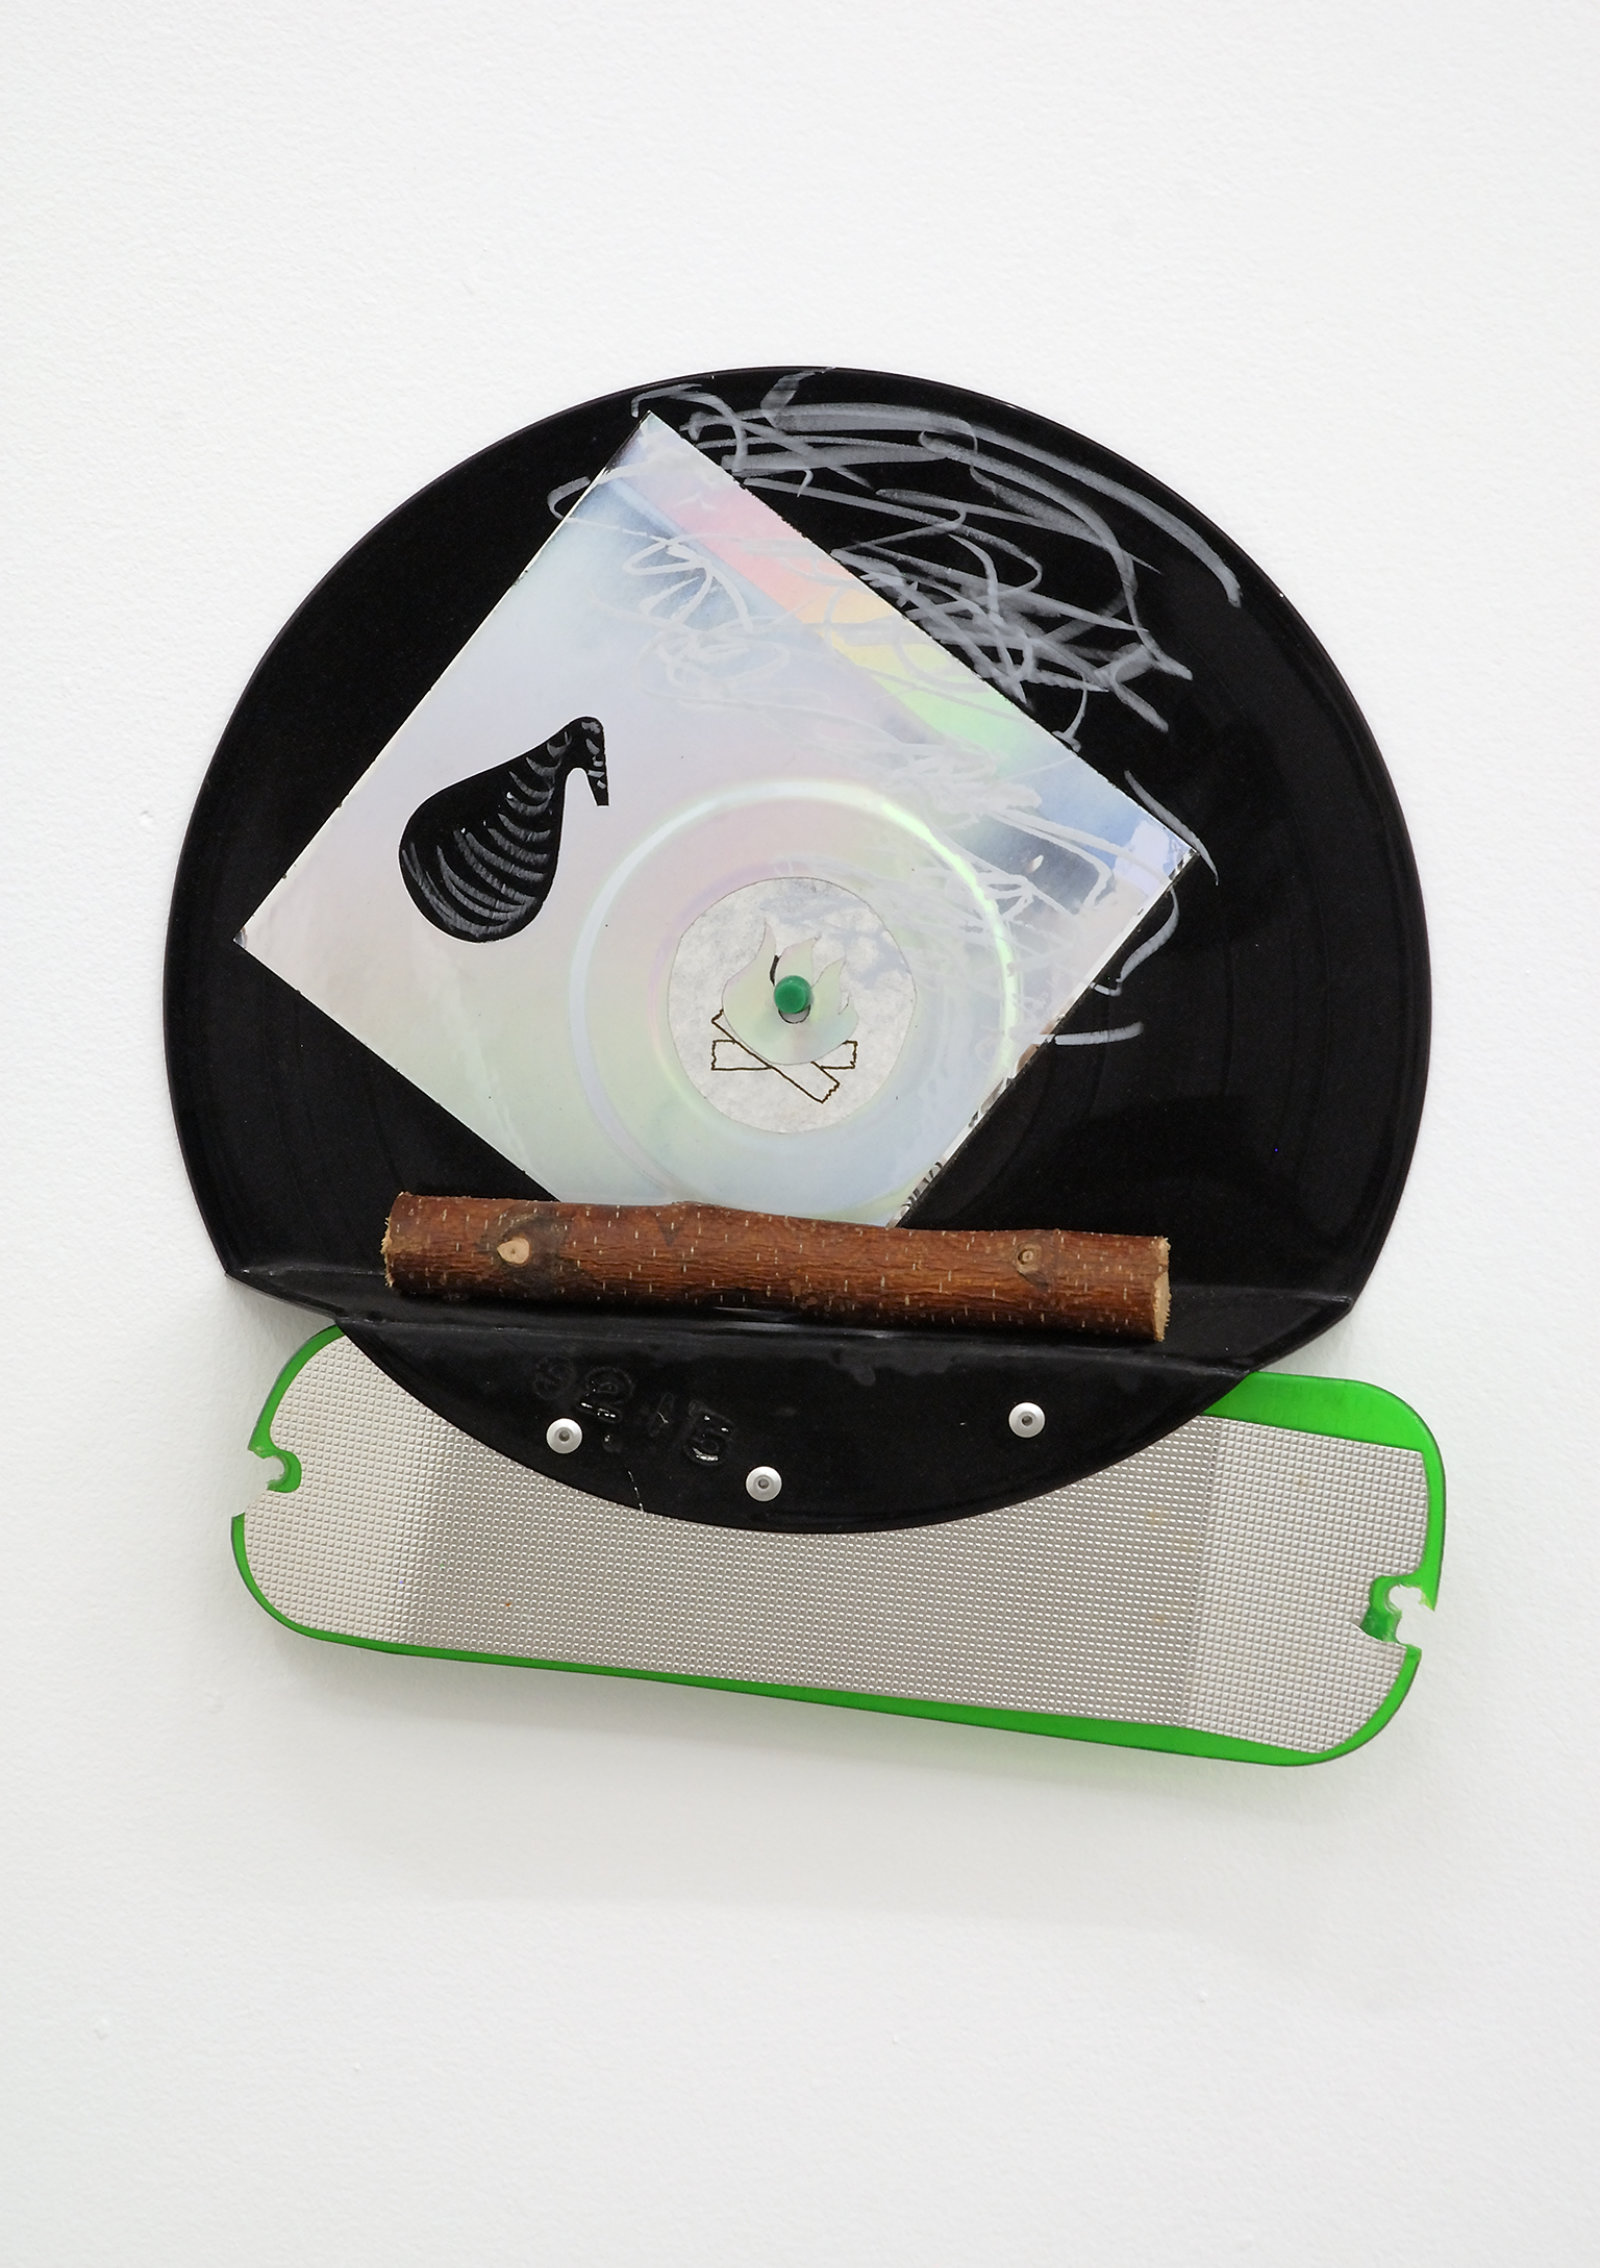 Jerry Pethick, Black Retort Travelogue, 1991/1992, Phonograph record, crayon, spectrafoil, plastic fishing lure, piece of wooden branch, metal screws, 12 x 13 x 2 in. (30 x 32 x 5 cm)  